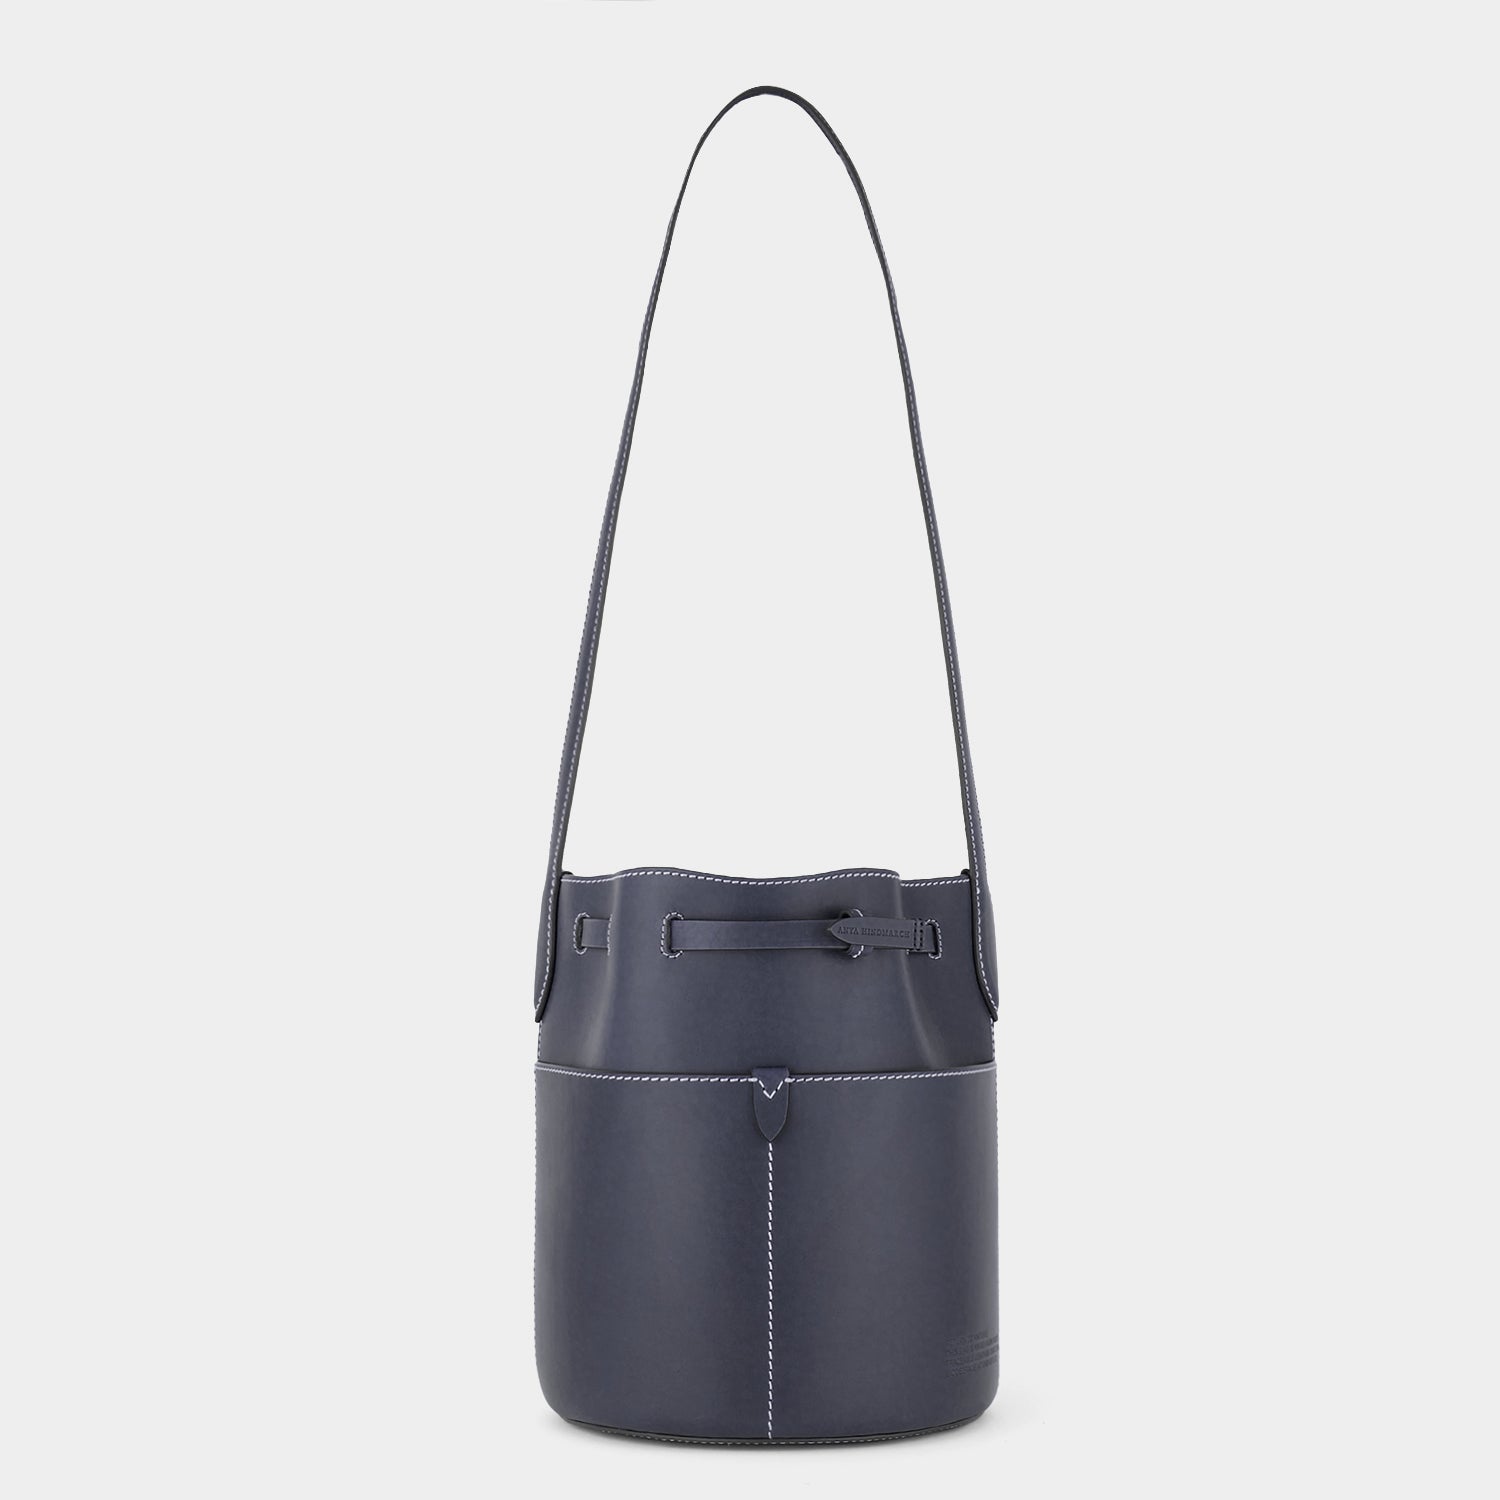 Return to Nature Small Bucket Bag -

                  
                    Compostable Leather in Marine -
                  

                  Anya Hindmarch US
